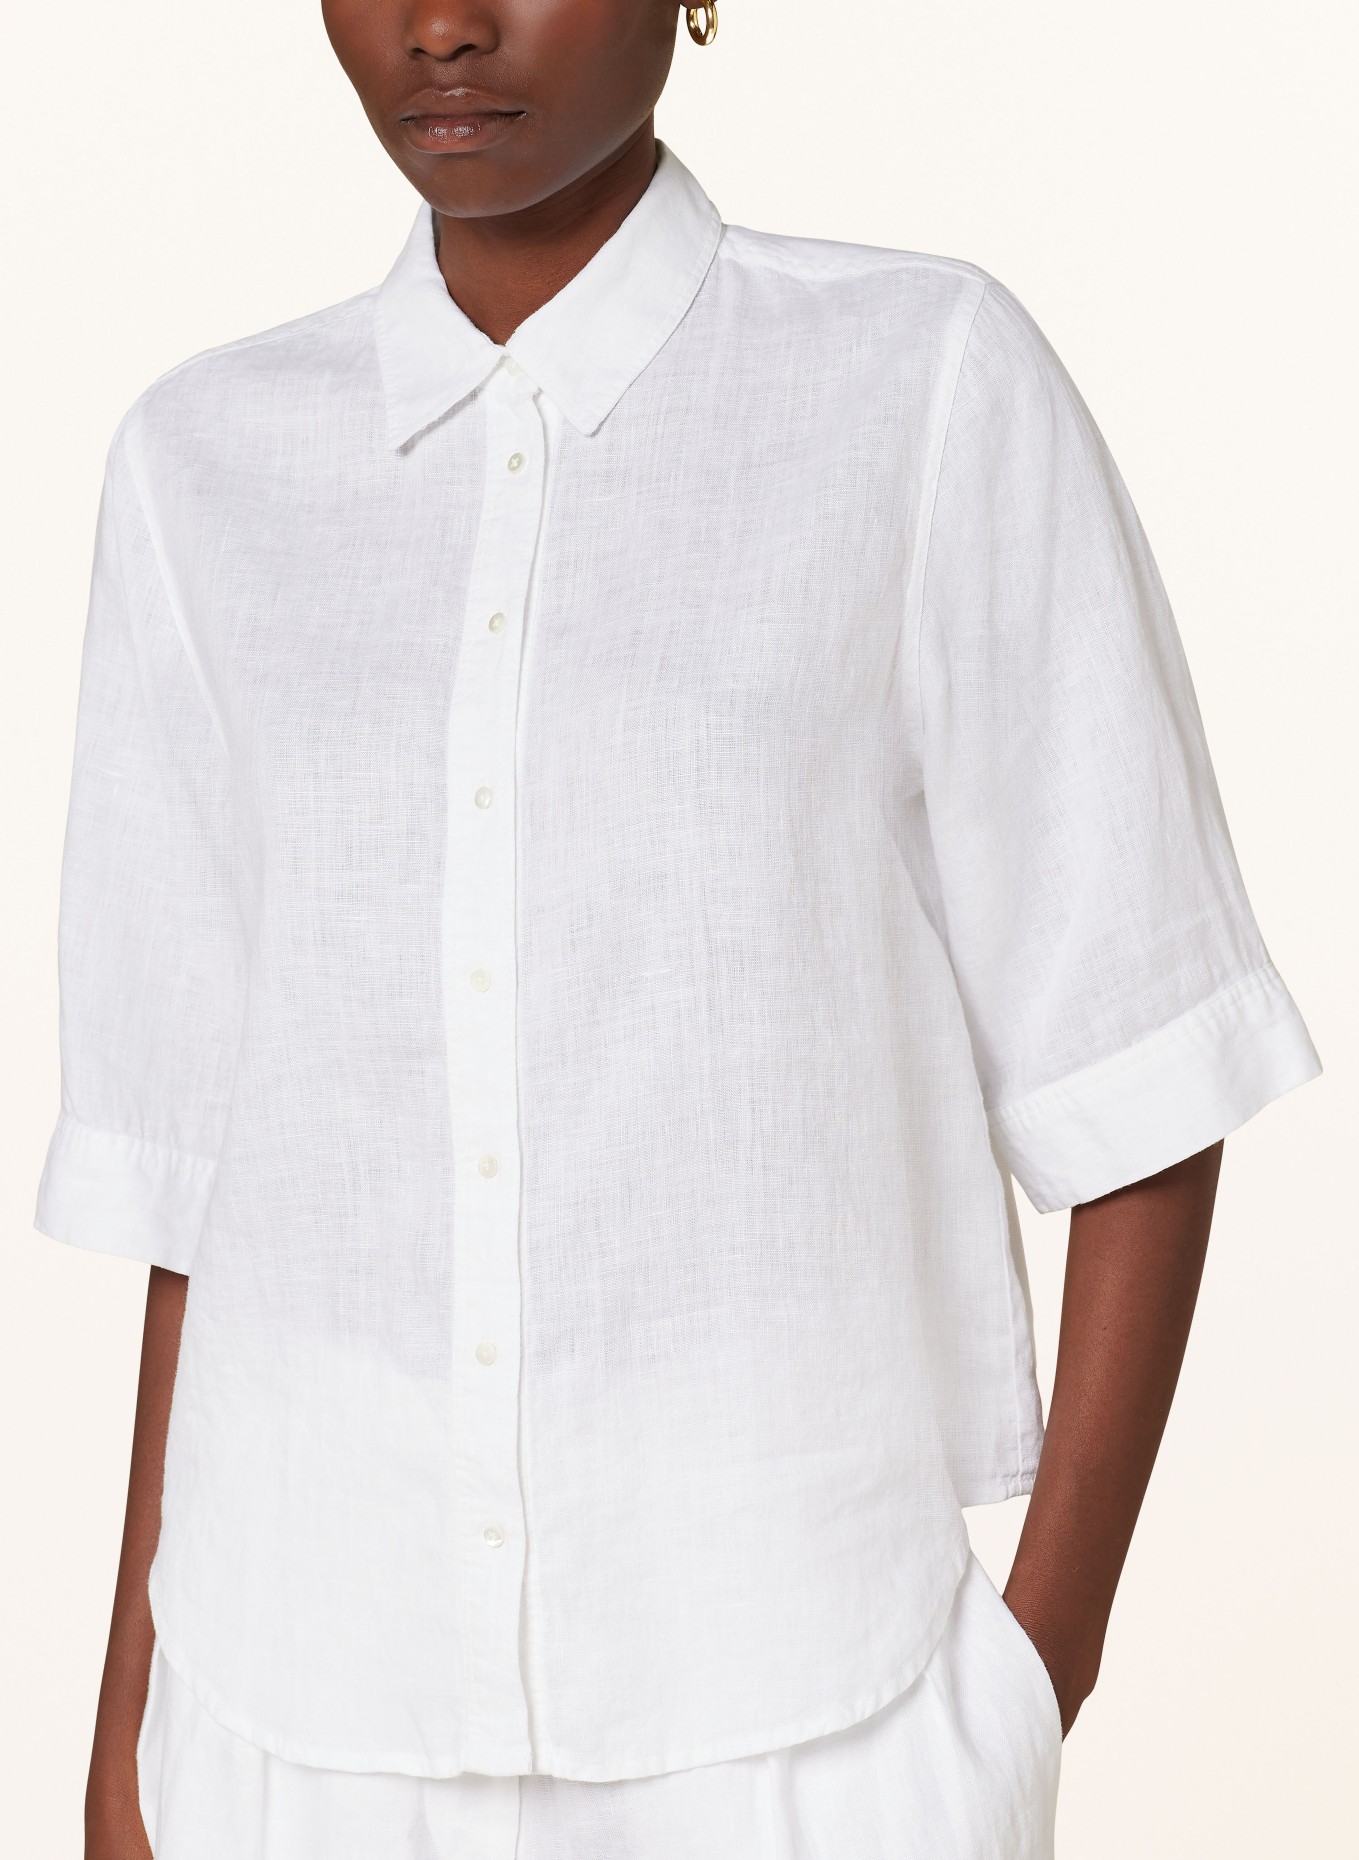 TONNO & PANNA Shirt blouse made of linen, Color: WHITE (Image 4)